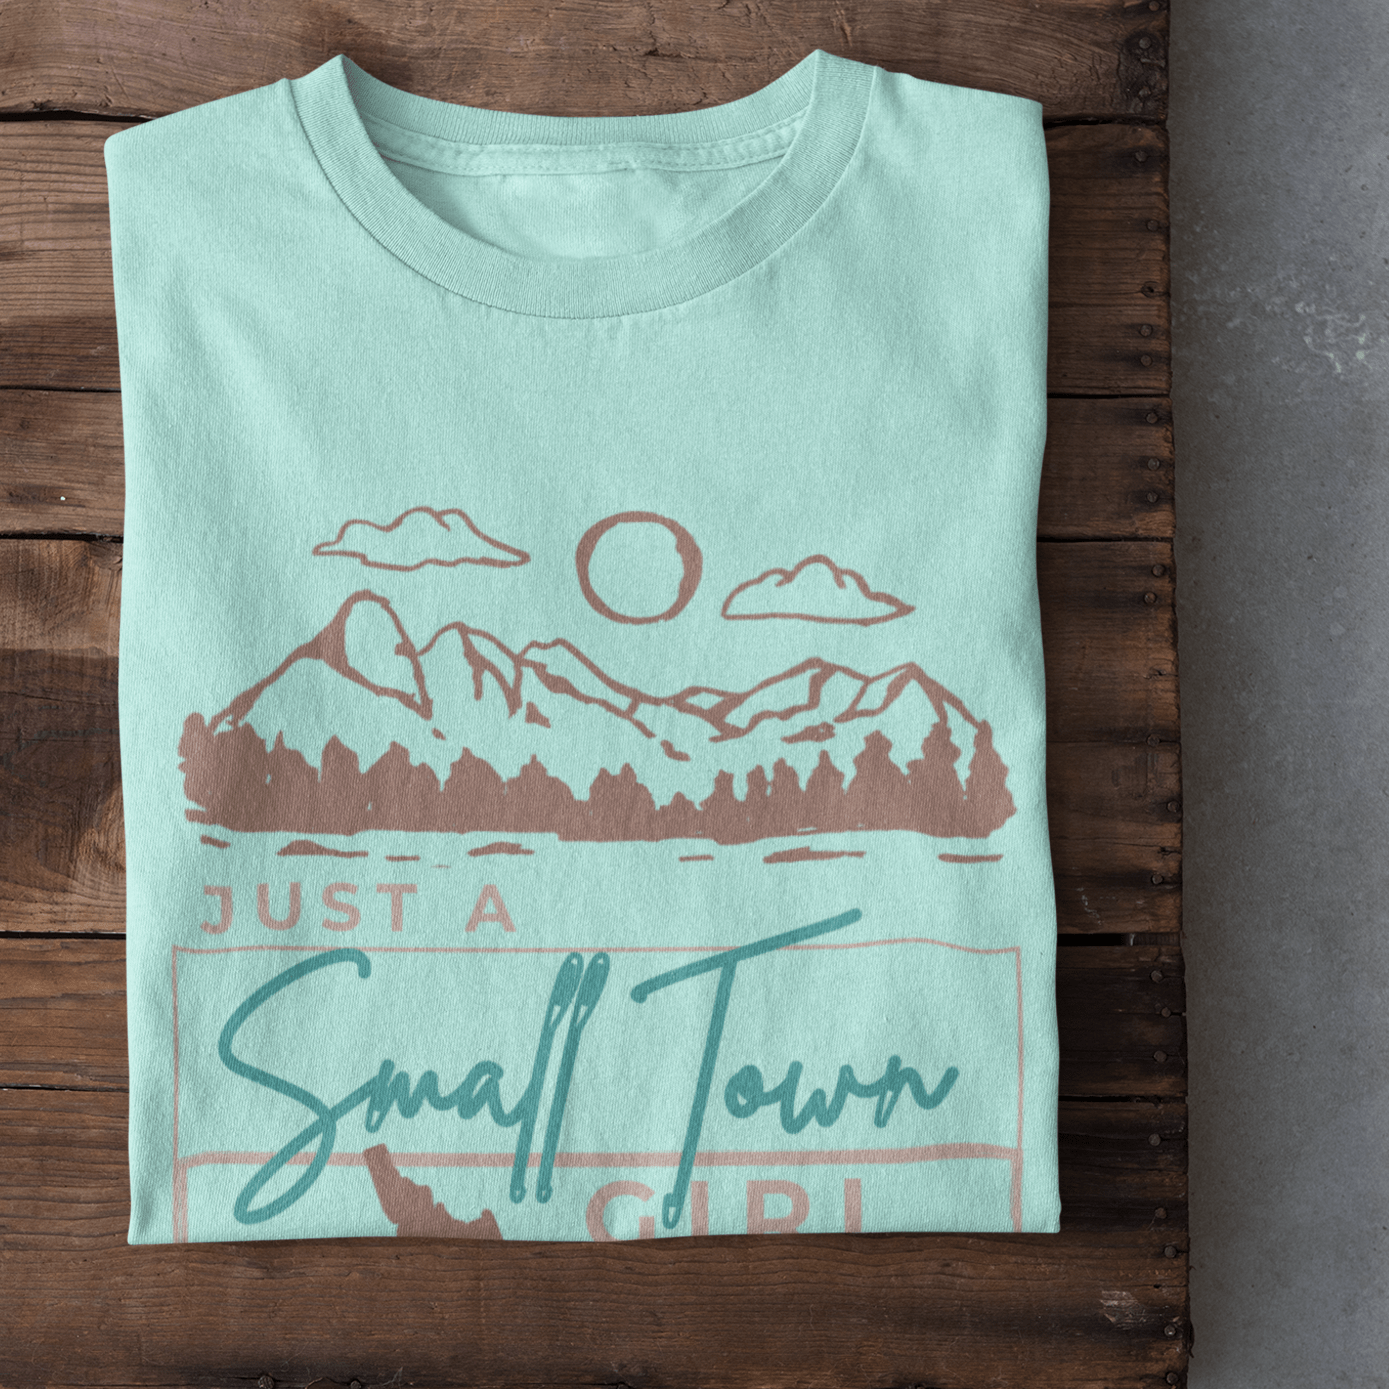 208 Supply Co Tees Small / Mint Small Town Girl Tee